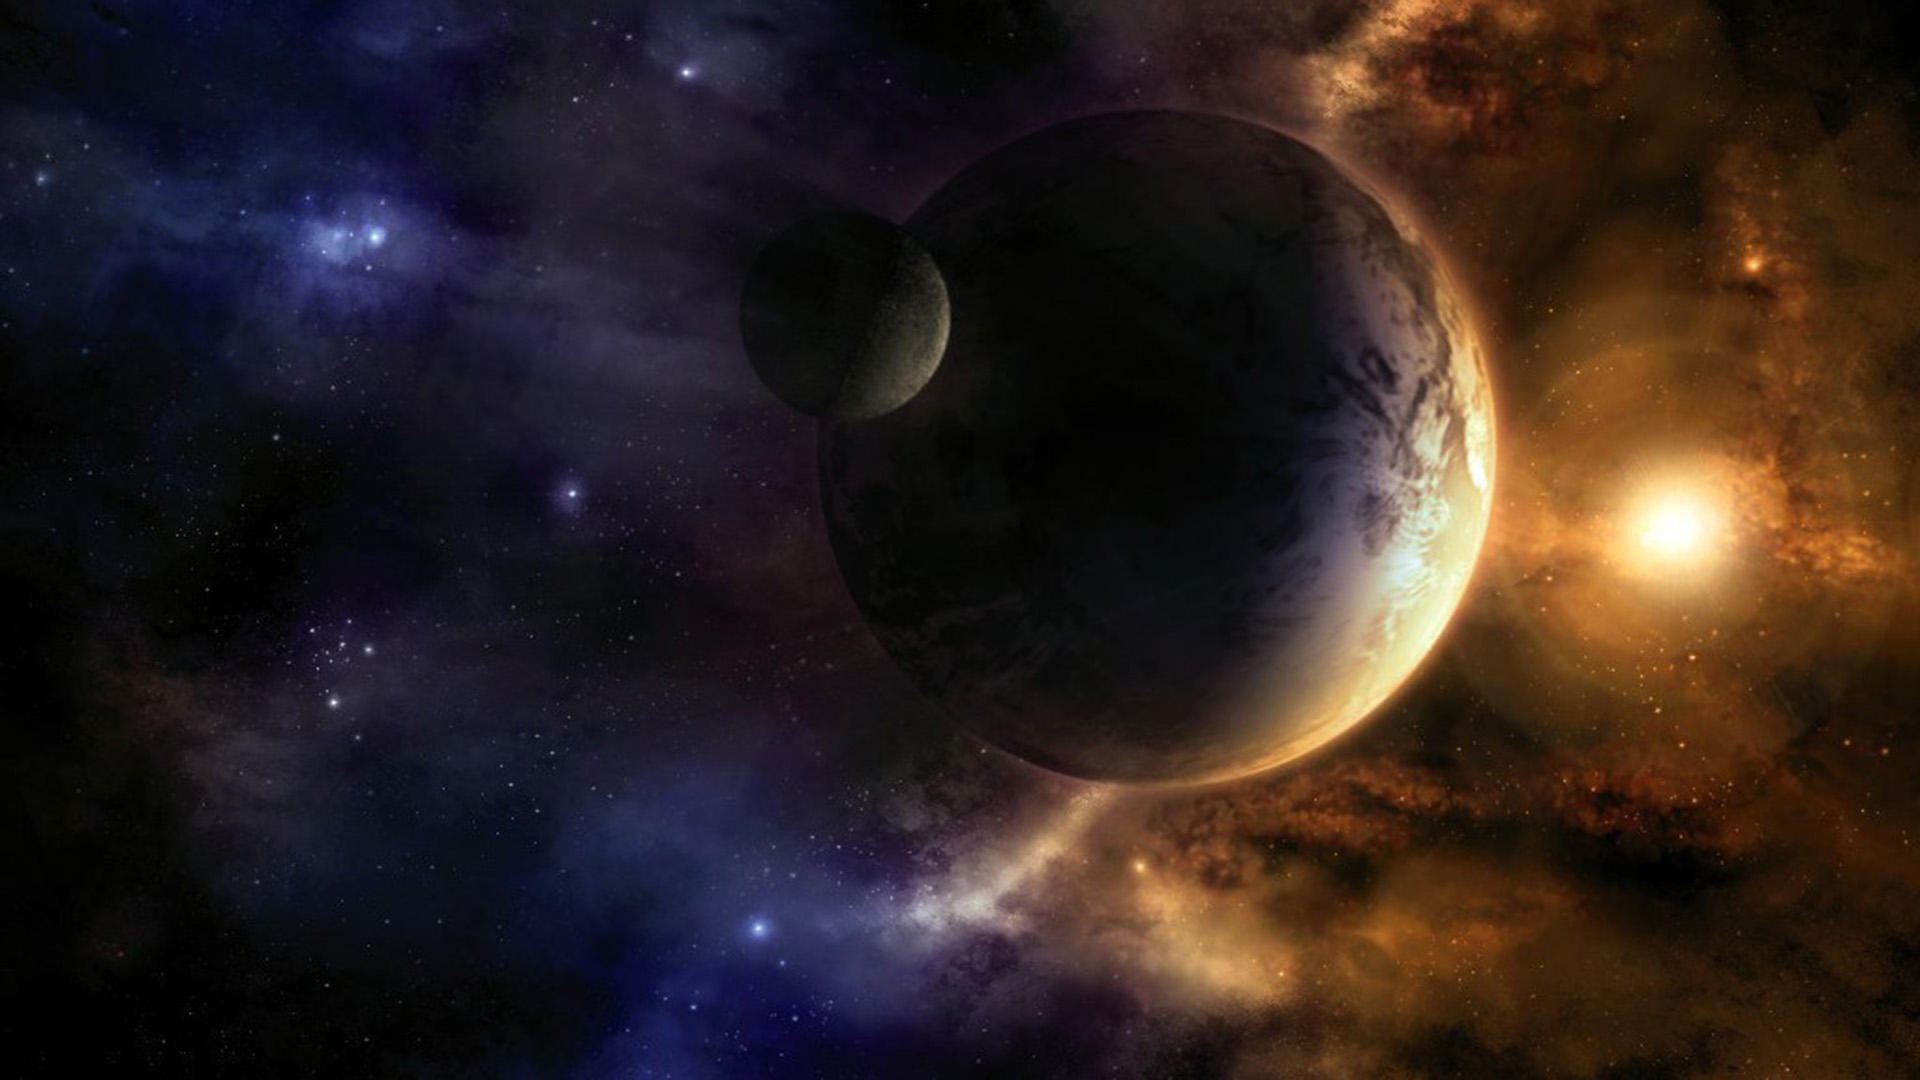 HD Universe Background For Desktops Laptops And